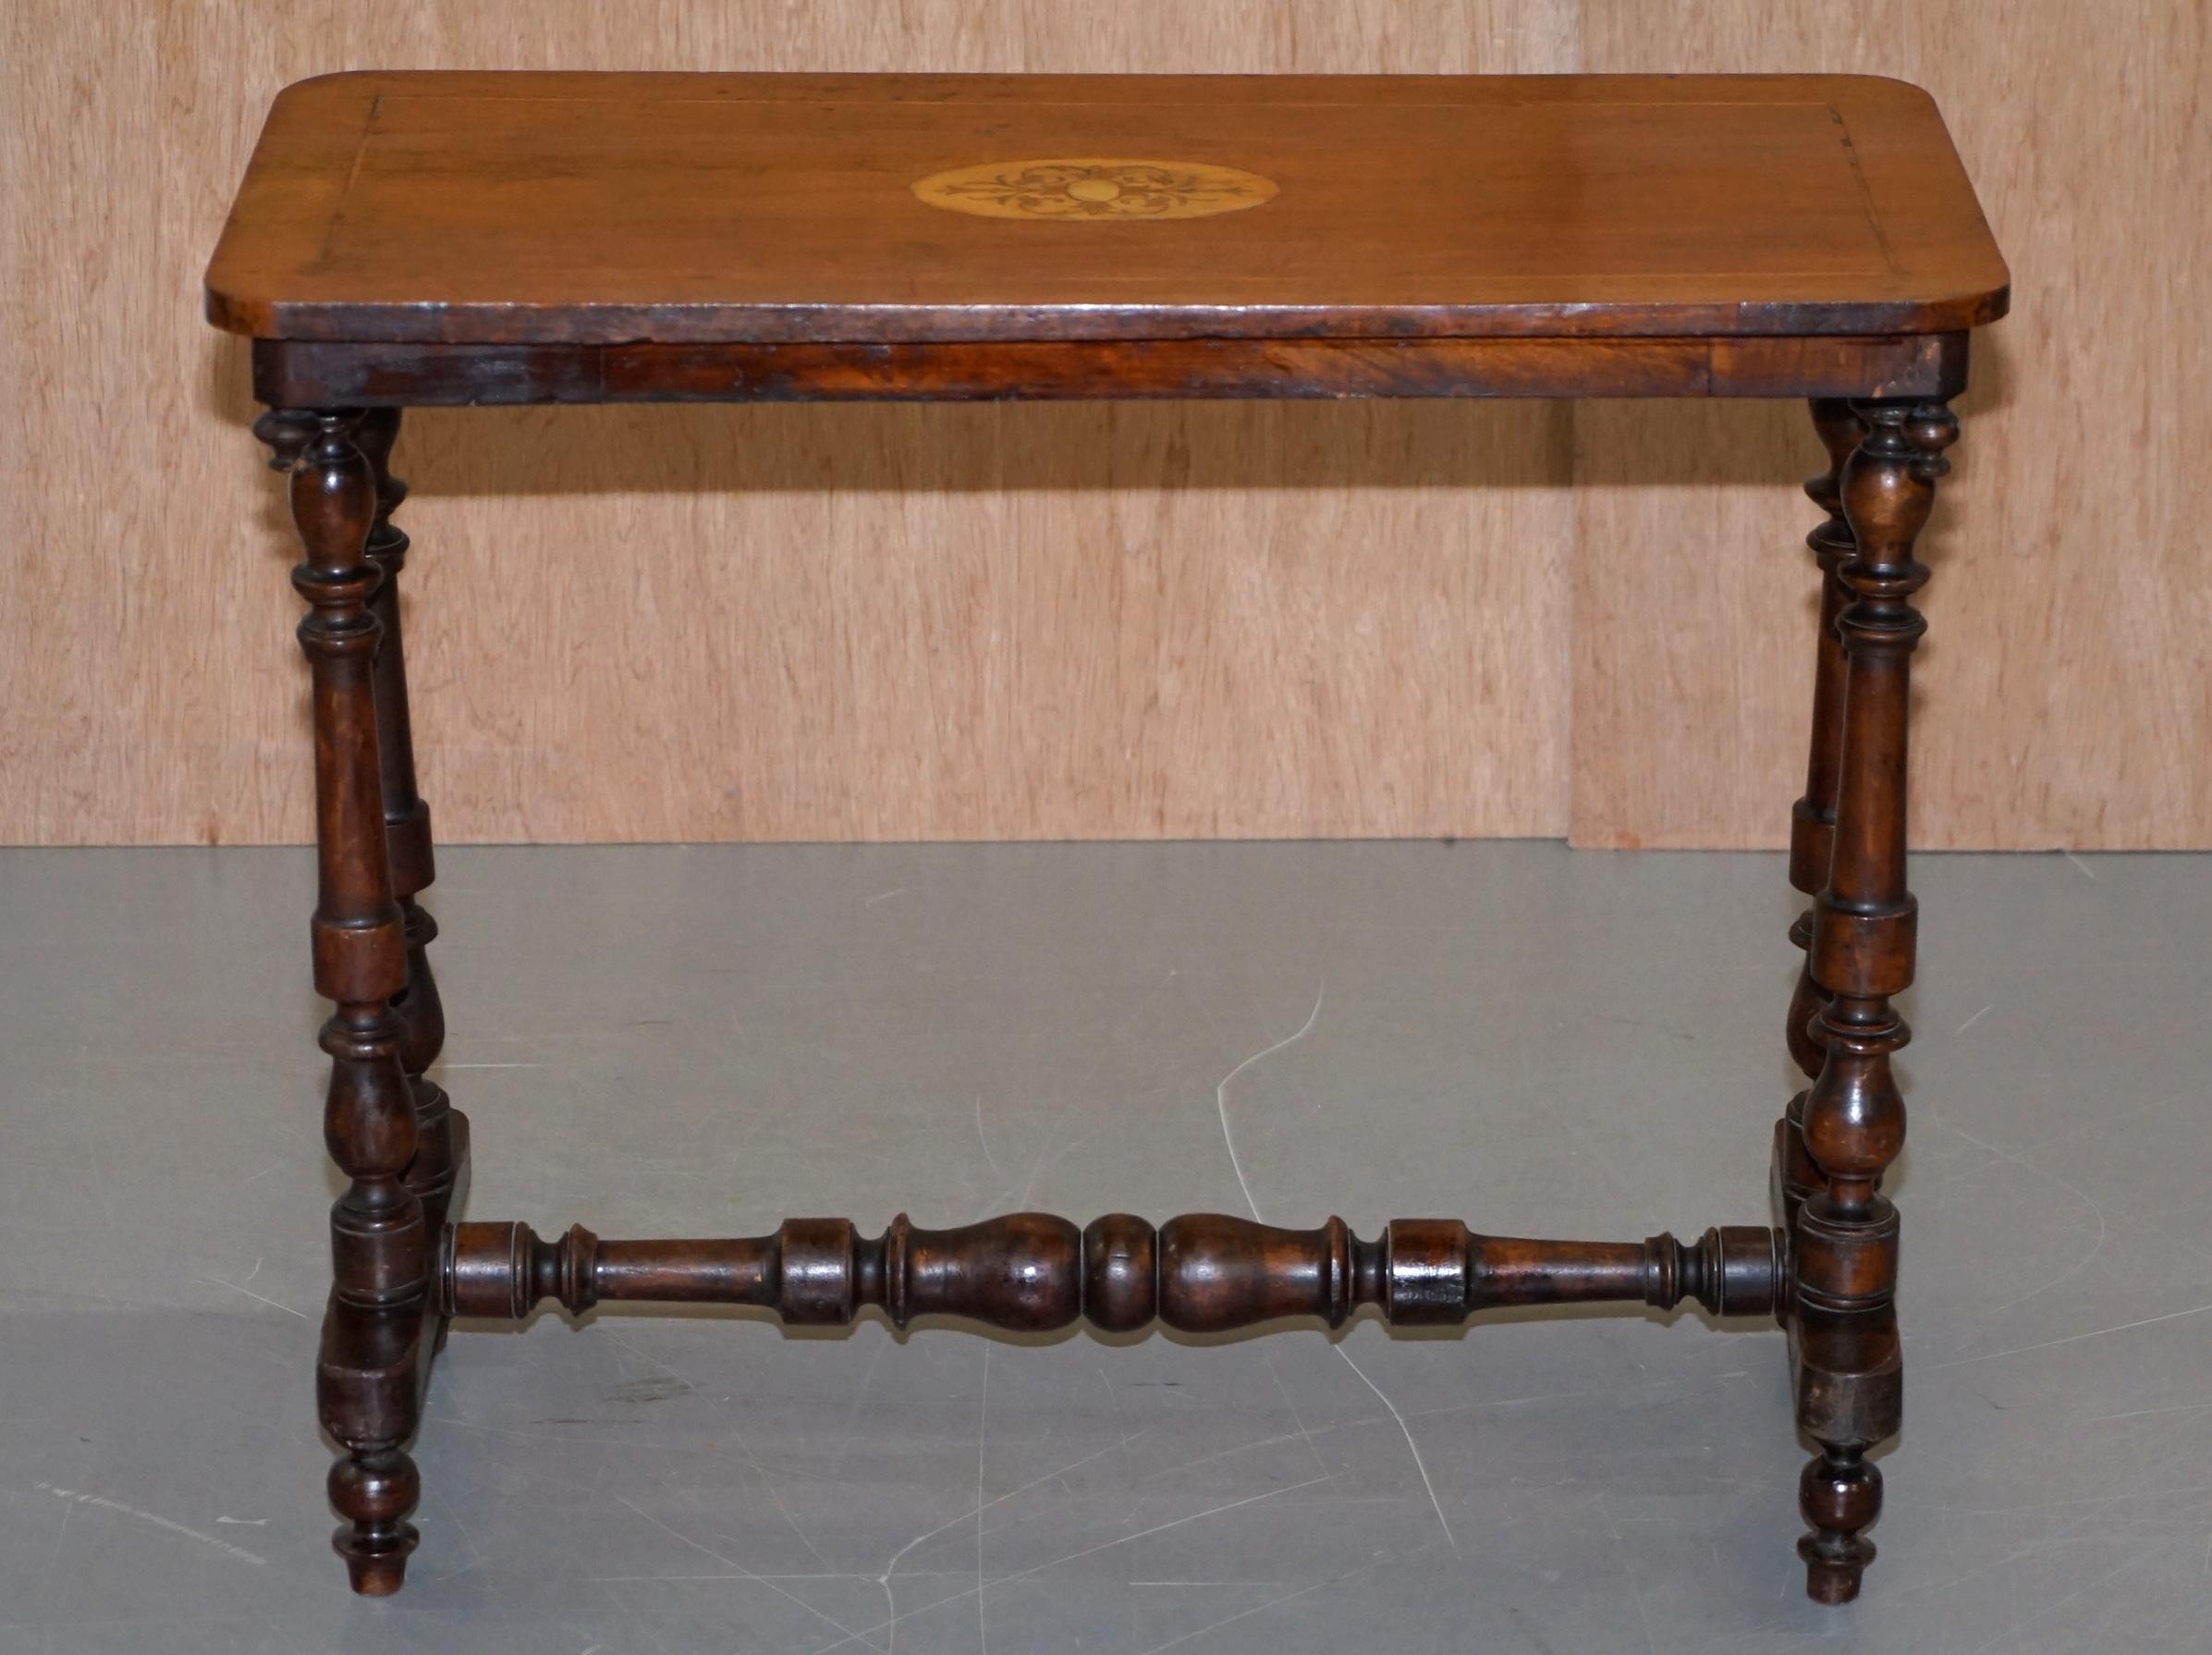 We are delighted to offer for sale this stunning original Victorian walnut inlaid silver tea or occasional table

Totally original and unrestored other than cleaning waxing a polishing. This mid Victorian occasional table is versatile and can be